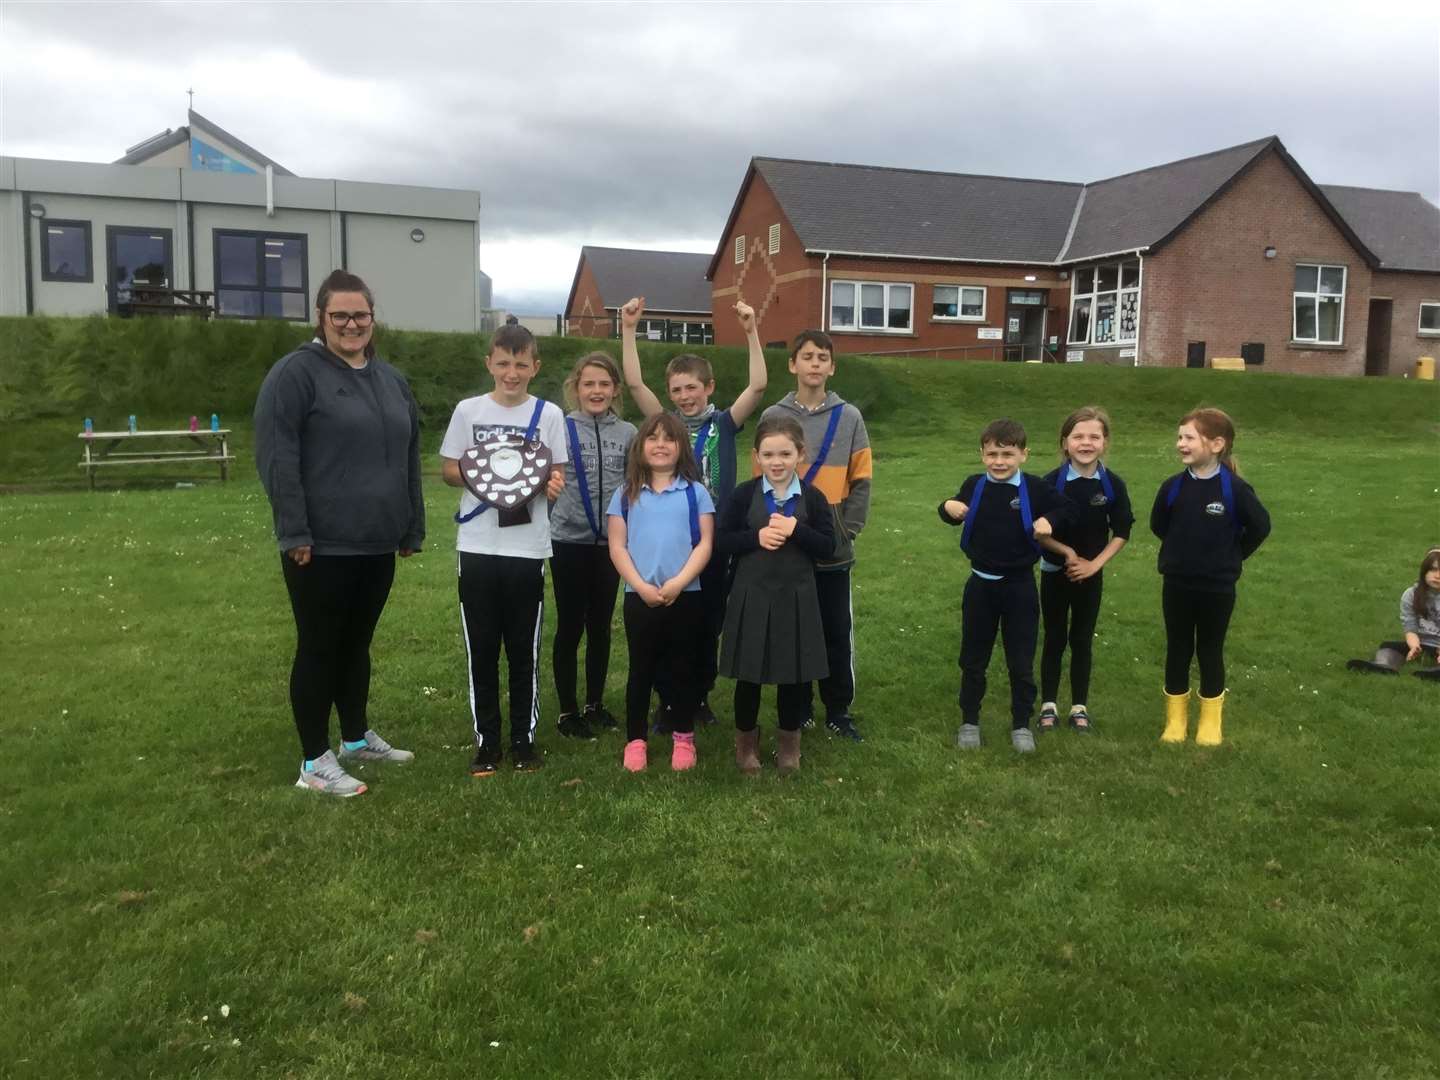 House captain Kieran Dooner was presented with the coveted shield by P4-7 teacher Eilidh Munro. Also pictured are team members: Isabella Mackenzie, Megan Maclean, Harry Maclean, Paige Mackay, Scott Drennan, Zach Matheson, Eliza Mackenzie and Lilly Mackay.